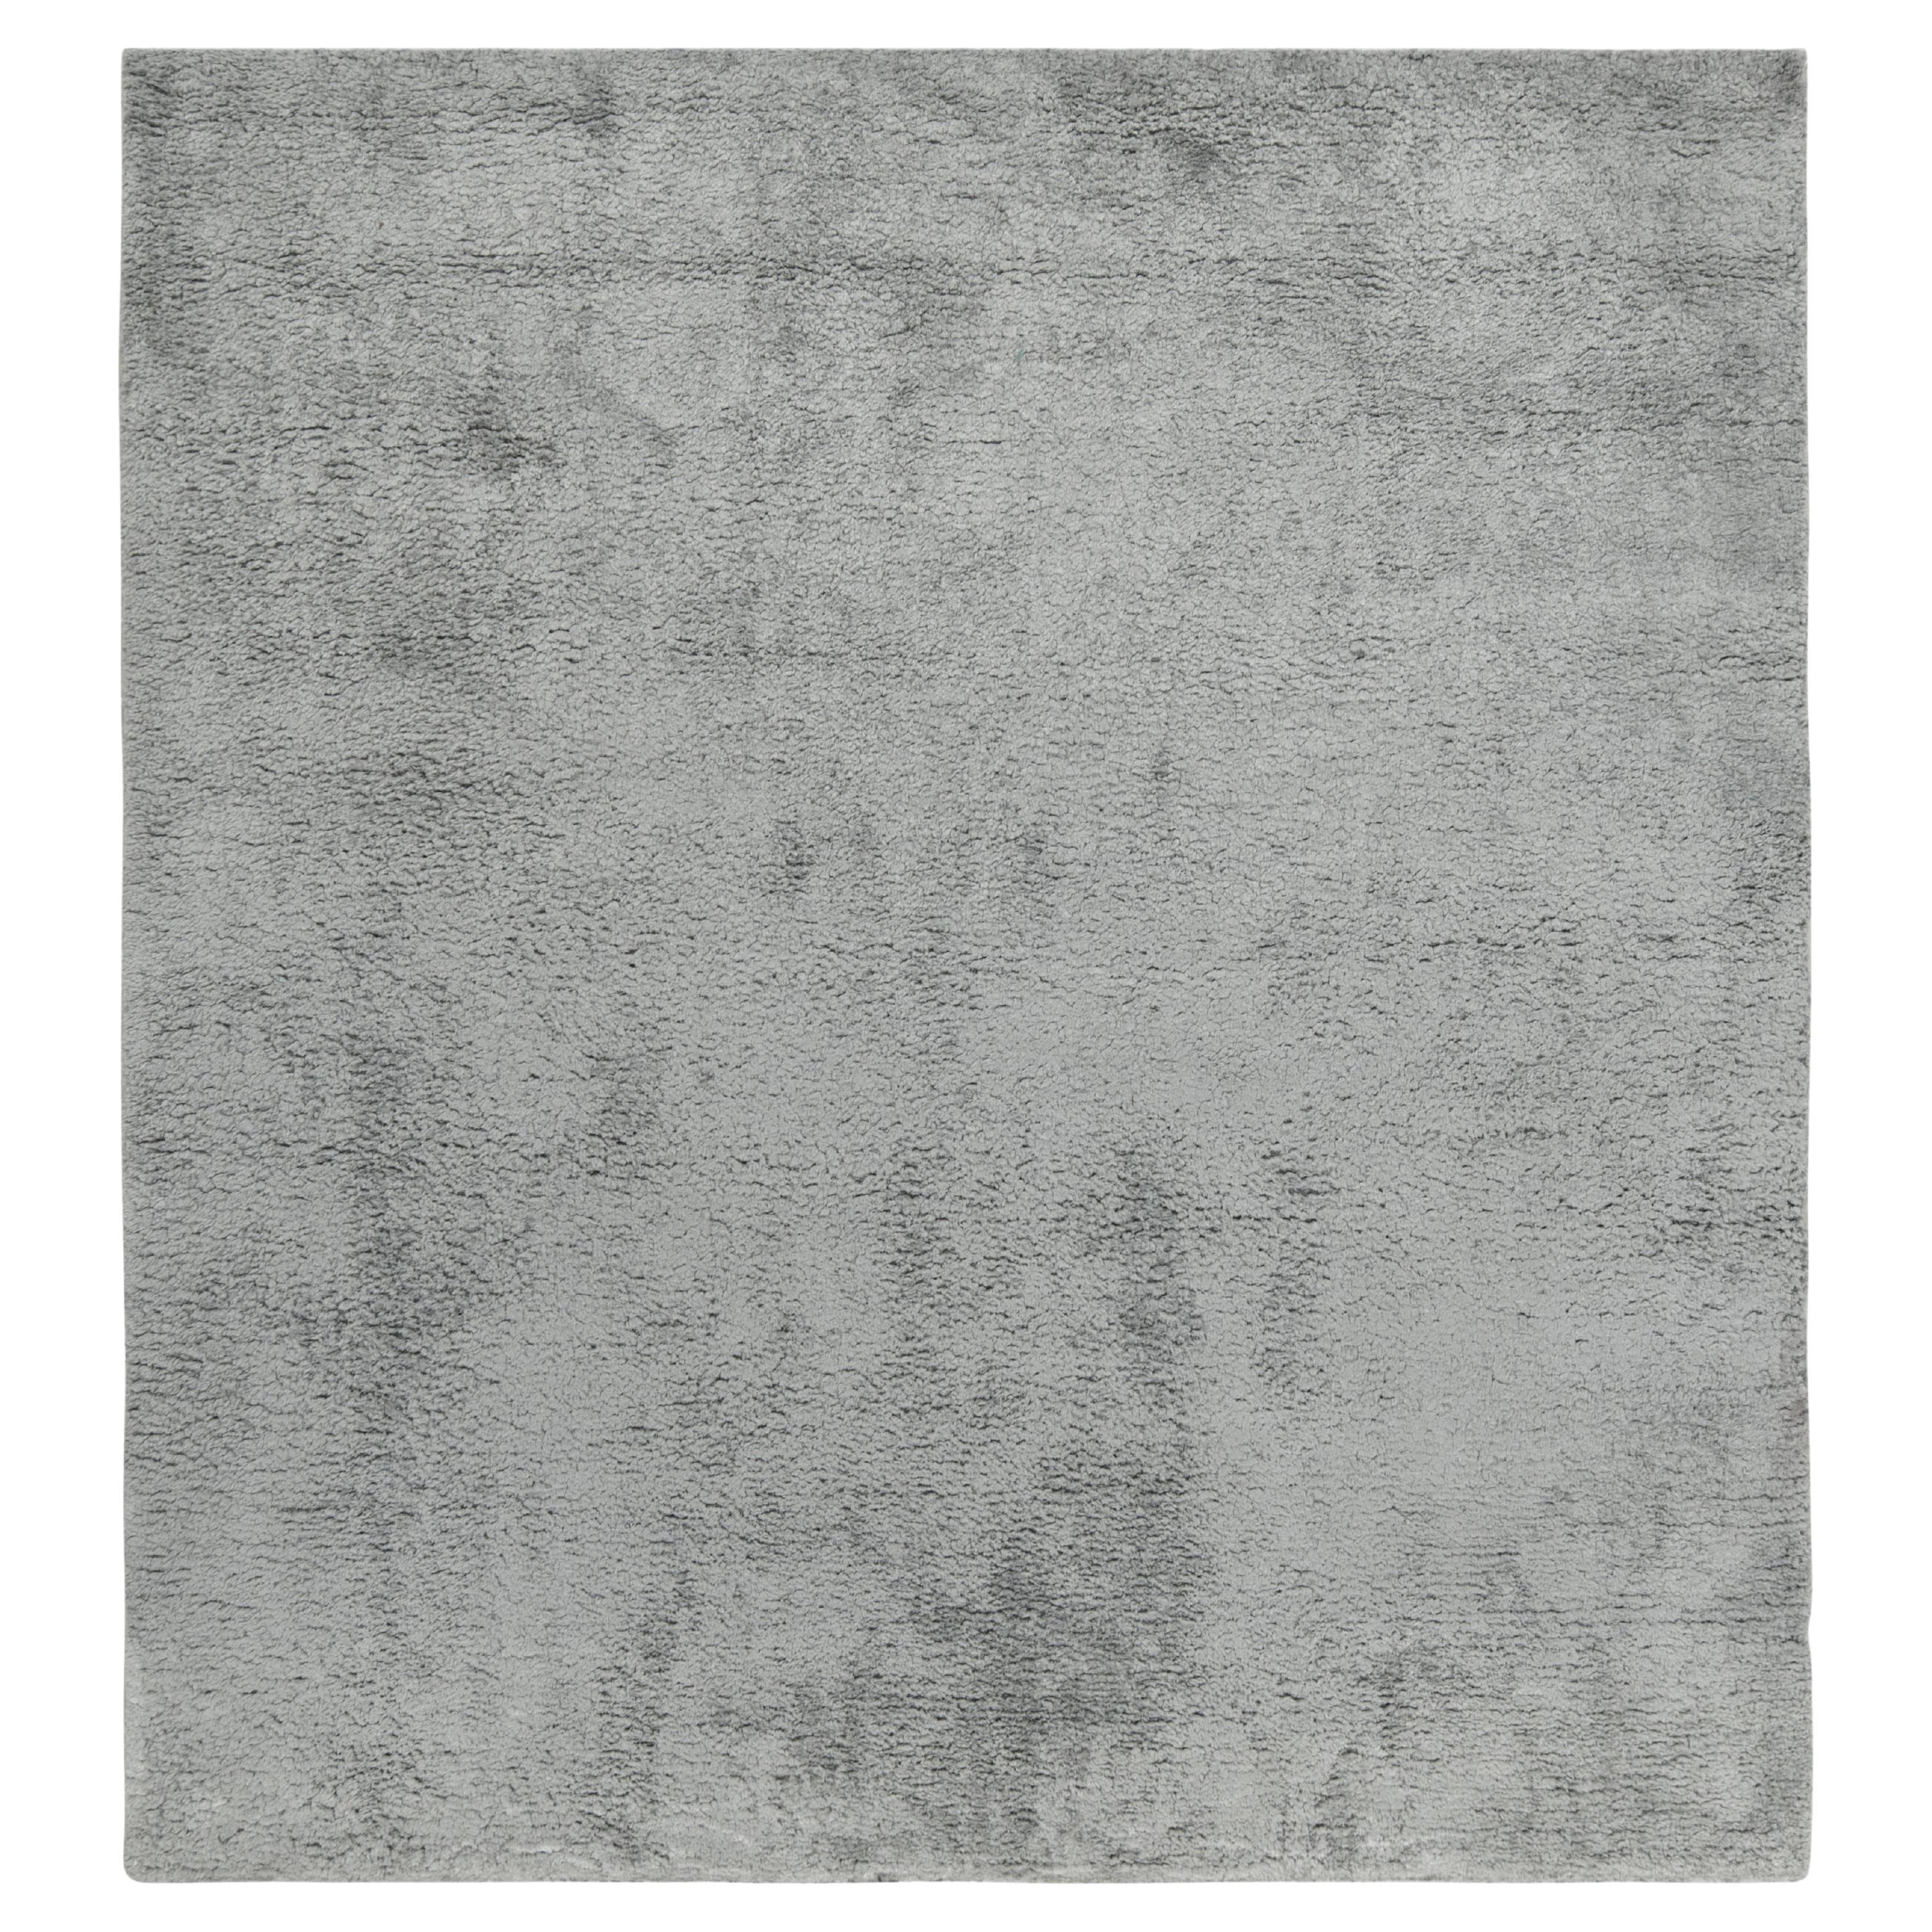 Rug & Kilim’s Contemporary Rug in Solid Gray, High Pile For Sale